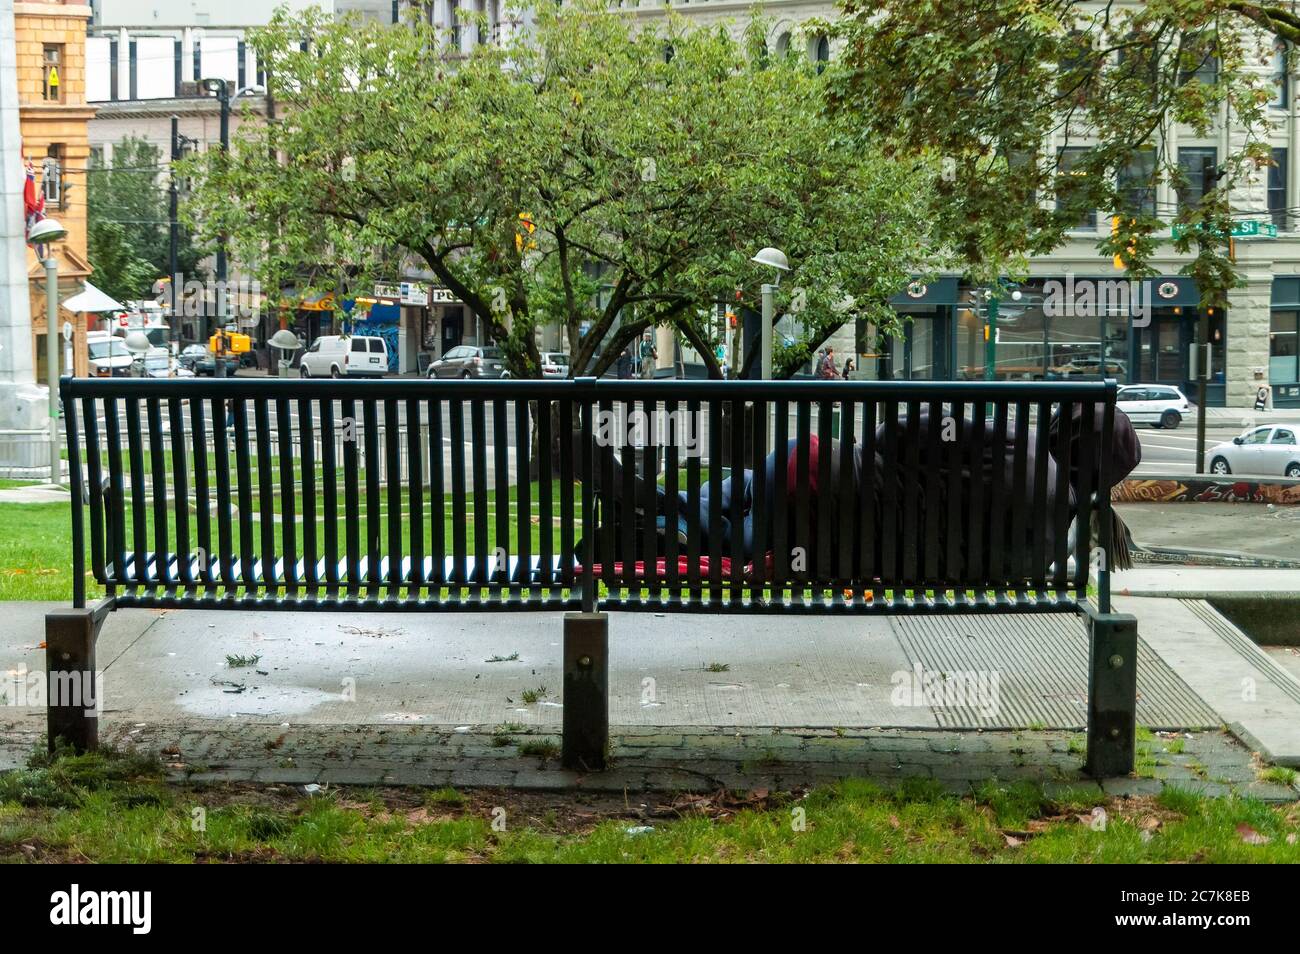 Vancuver, Canada - September 13, 2010: A homeless person rests on a city bench in downtown Vancouver, Canada. Stock Photo